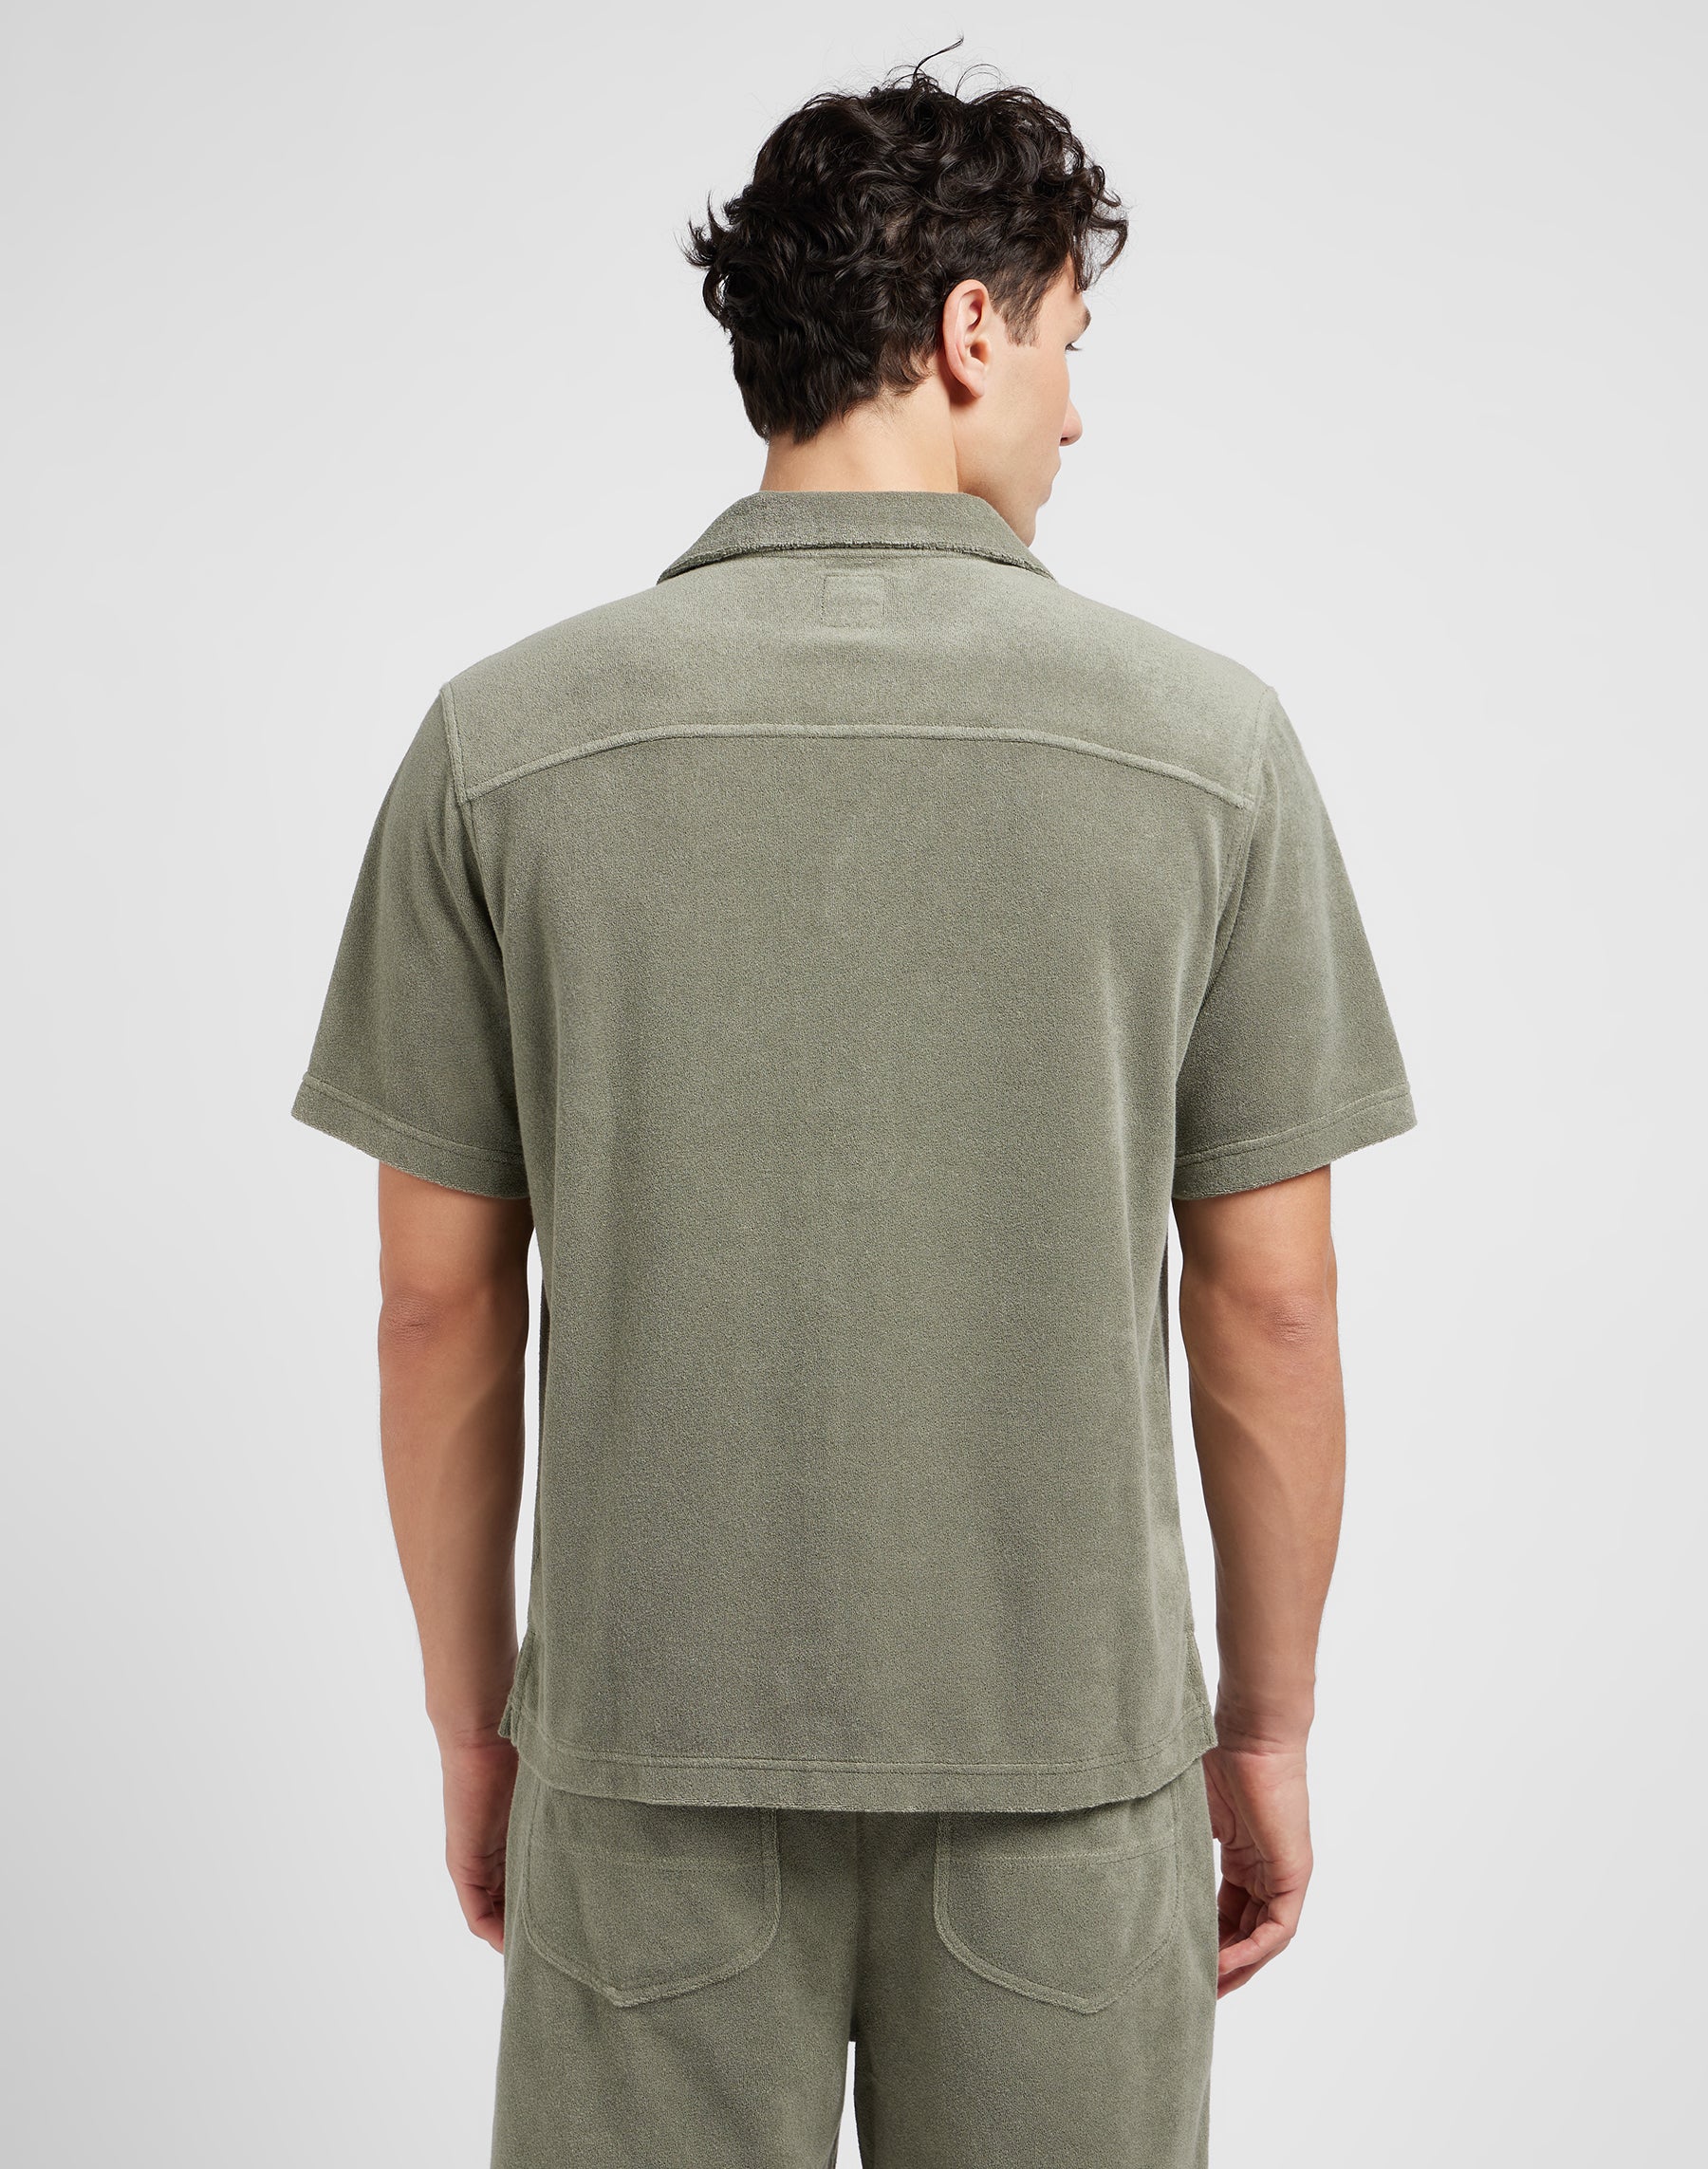 Knit Camp Shirt in Olive Grove Hemden Lee   